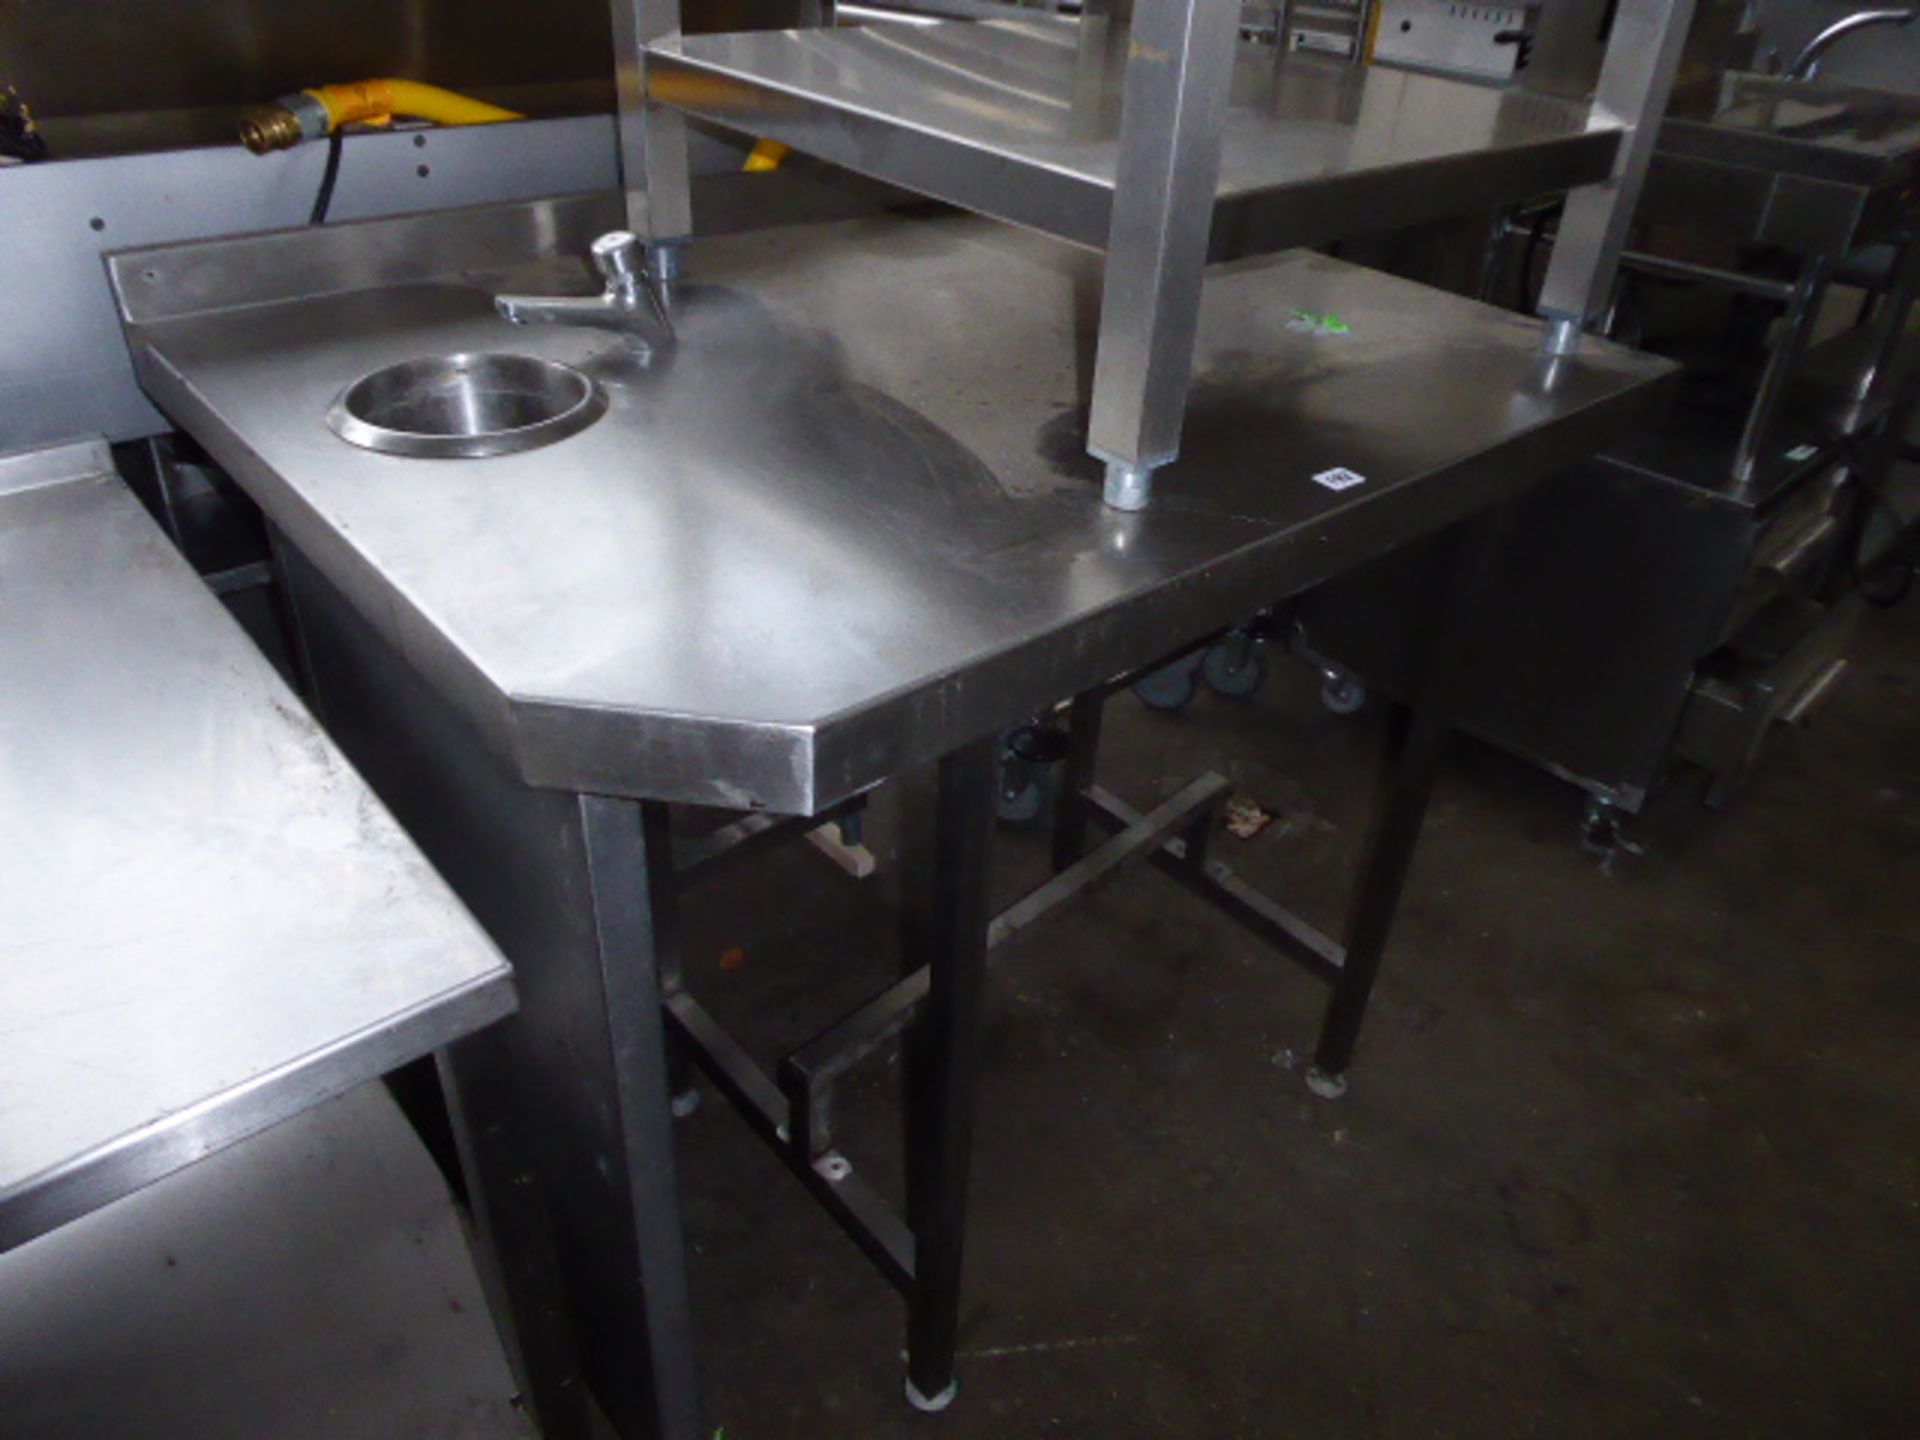 100cm stainless steel prep station with small handwash unit